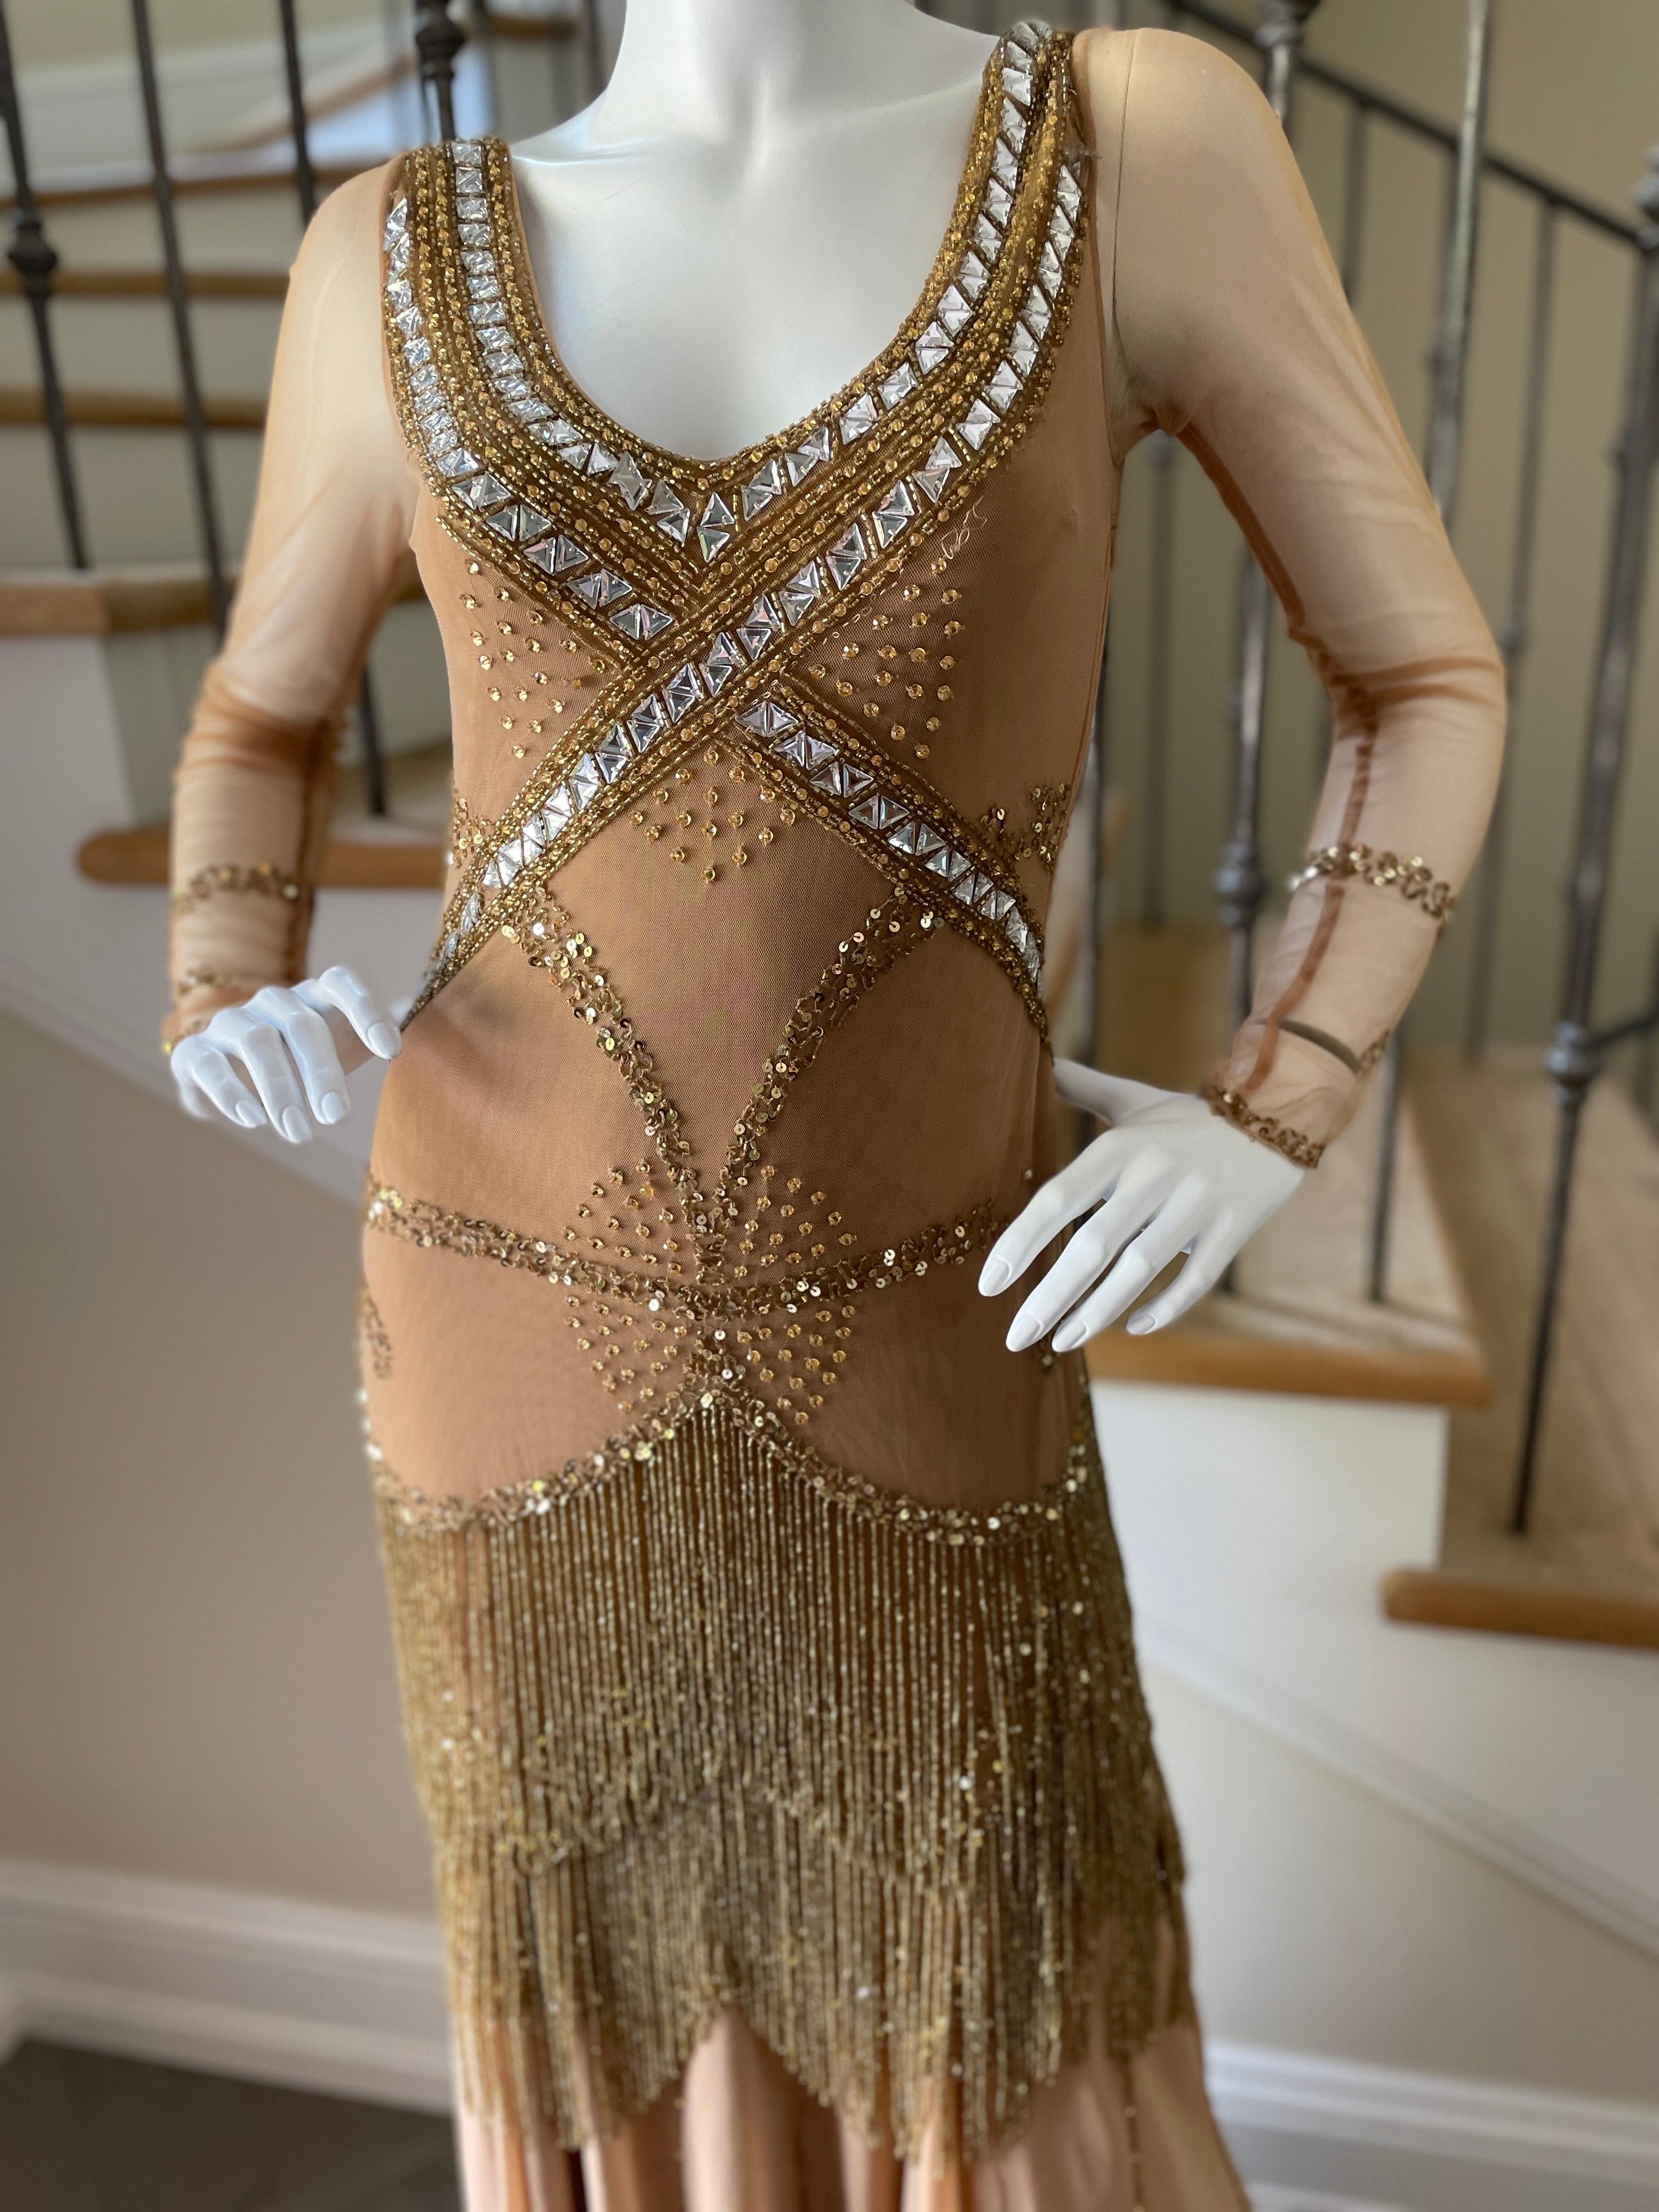 Class Cavalli Extravagantly Jeweled Vintage Evening Dress with Beaded Fringe In Good Condition For Sale In Cloverdale, CA